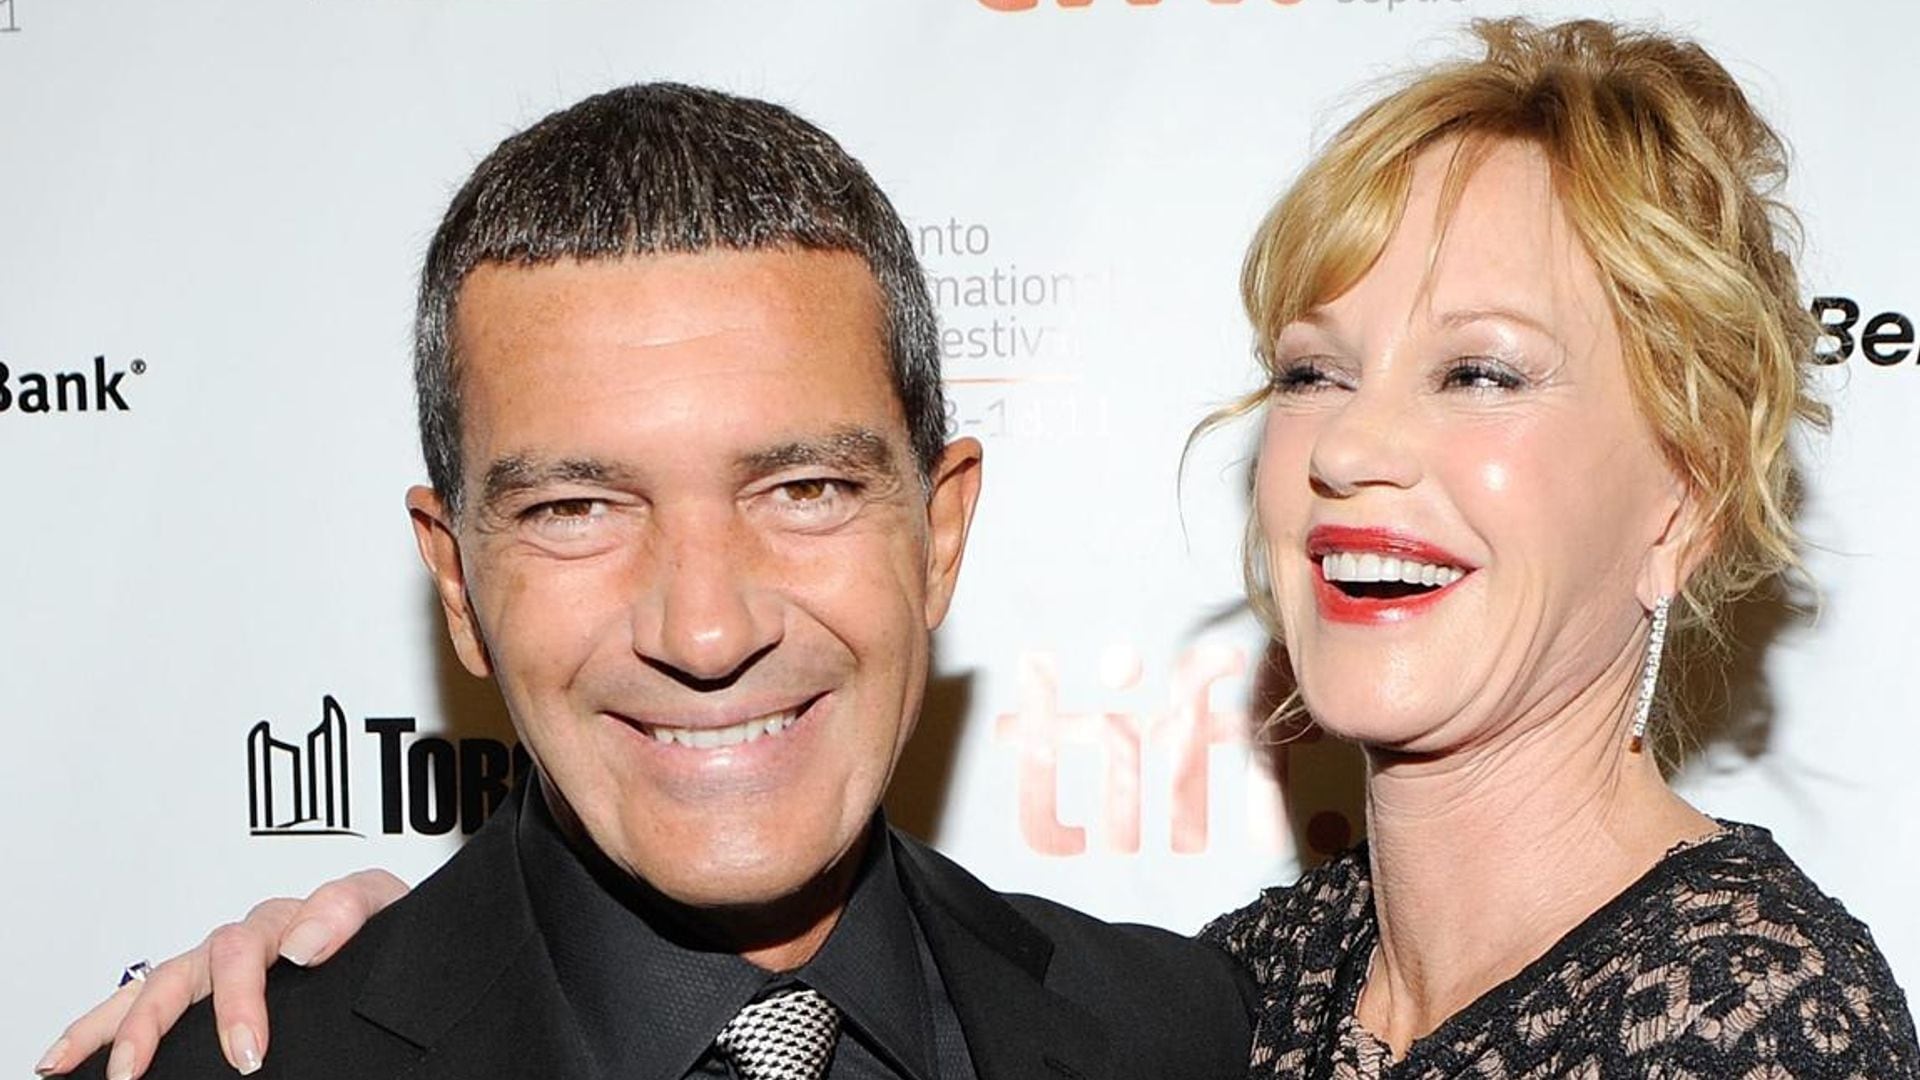 Antonio Banderas shares sexy #TBT picture that leaves ex-wife Melanie Griffith reminiscing